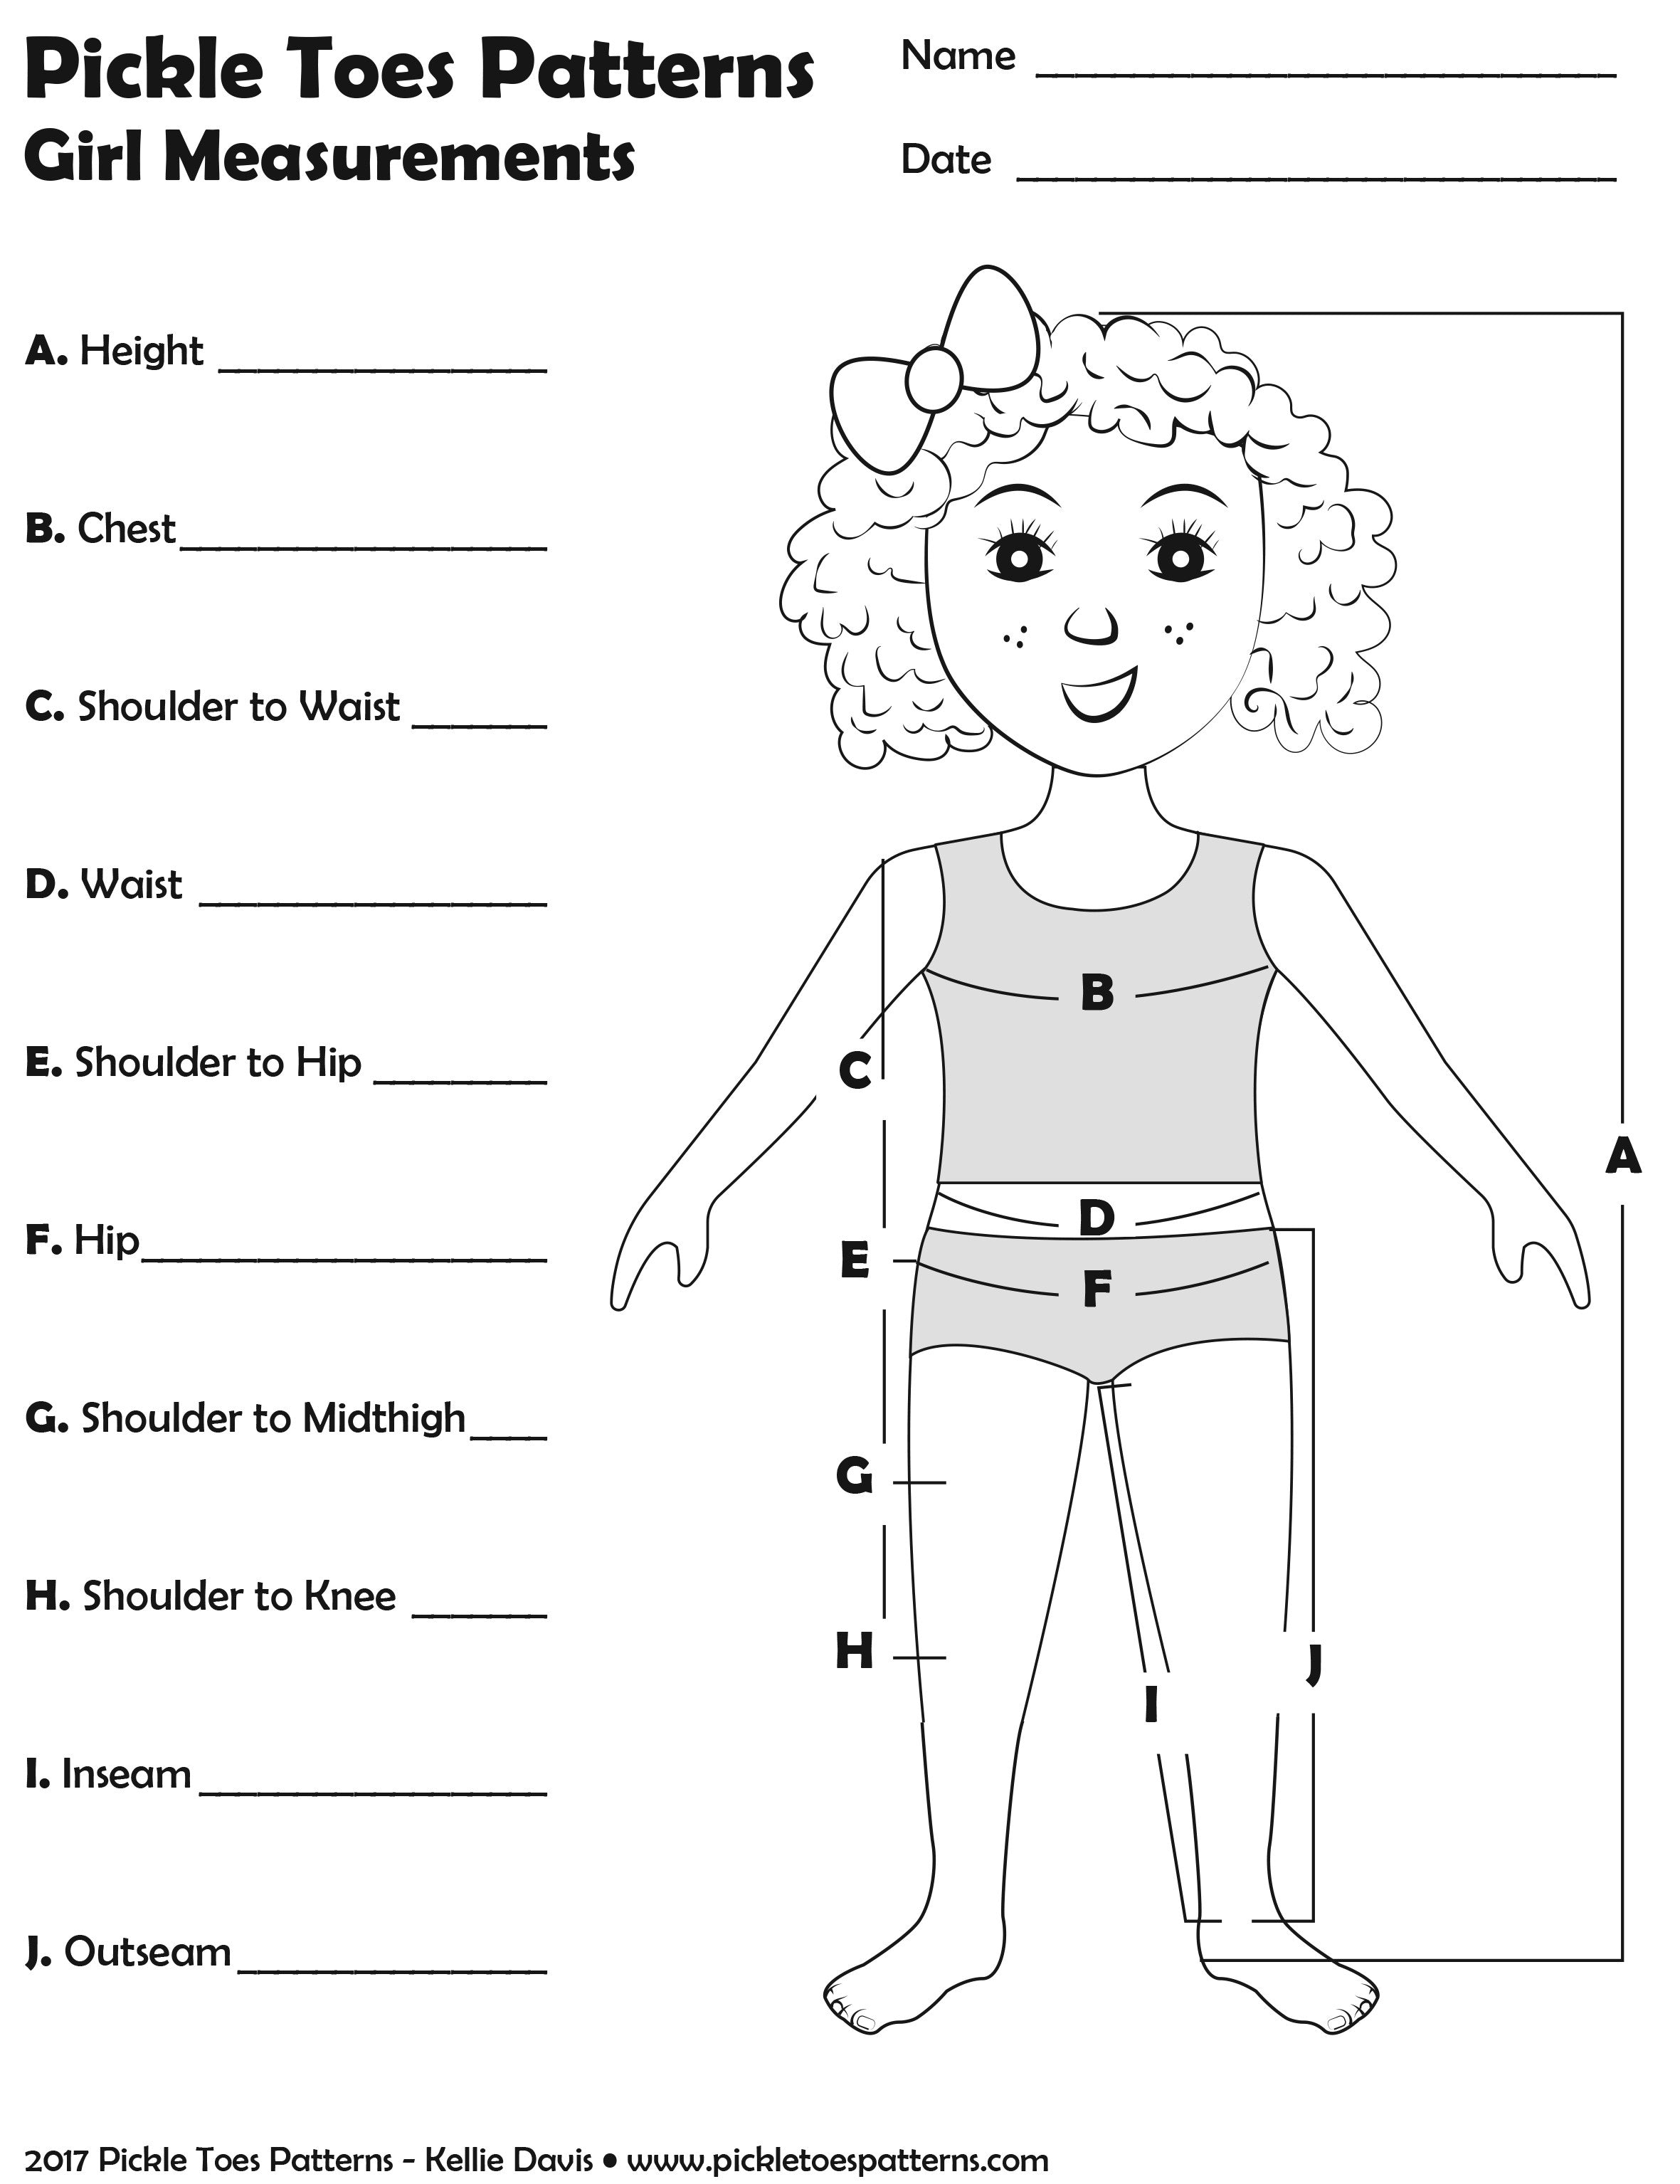 printable-measurement-charts-pickle-toes-patterns